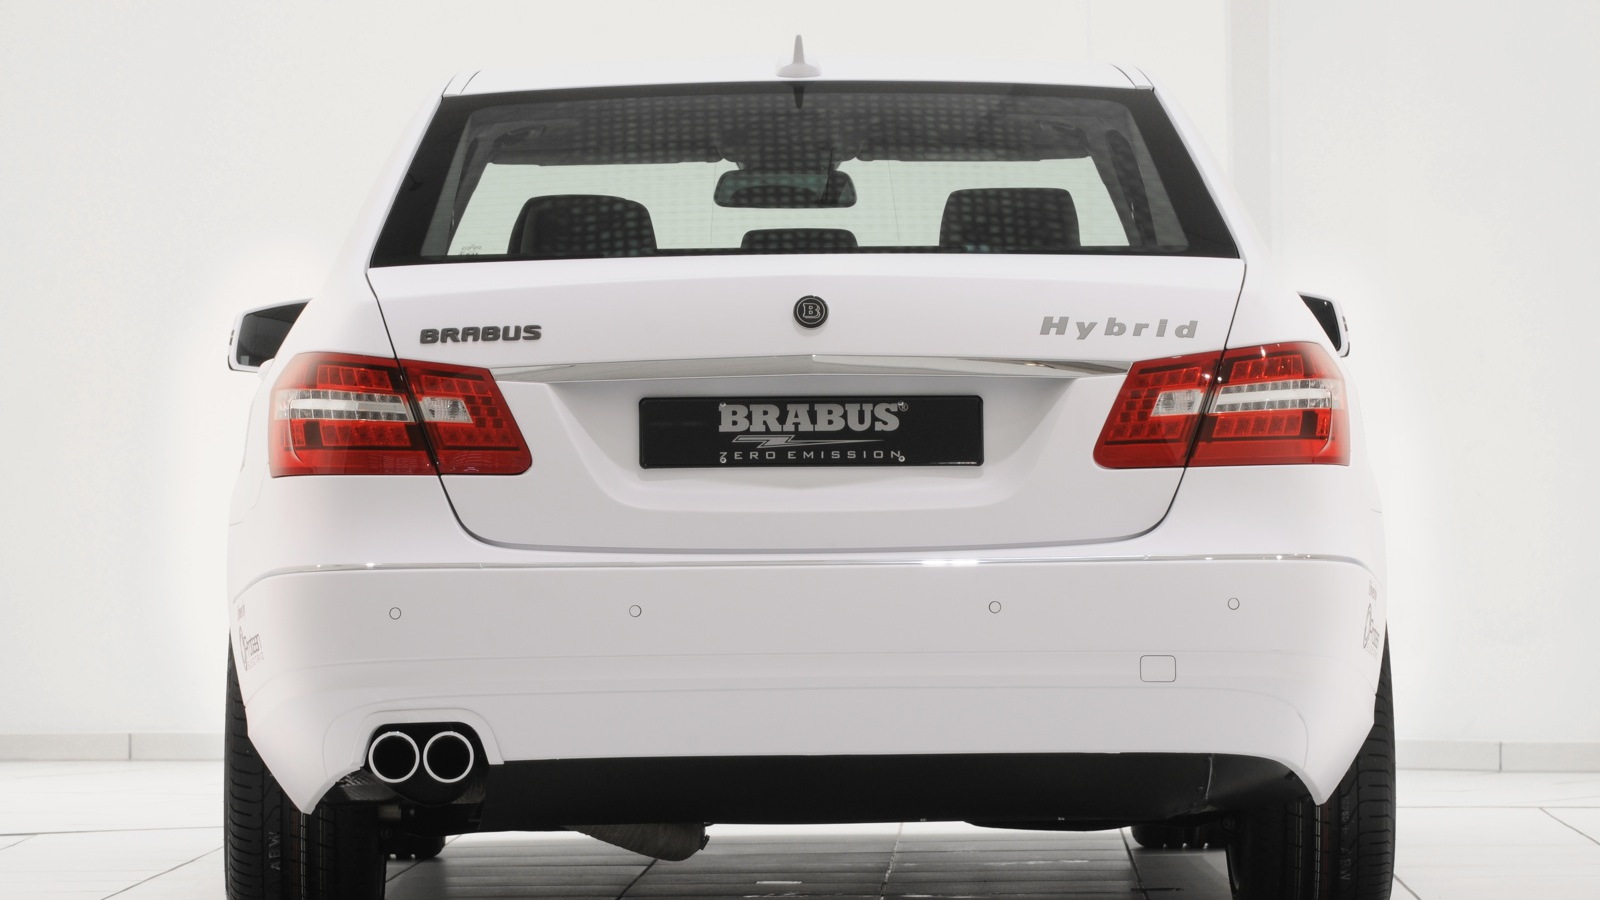 Brabus' Technology Project Hybrid, using Protean in-wheel motors.